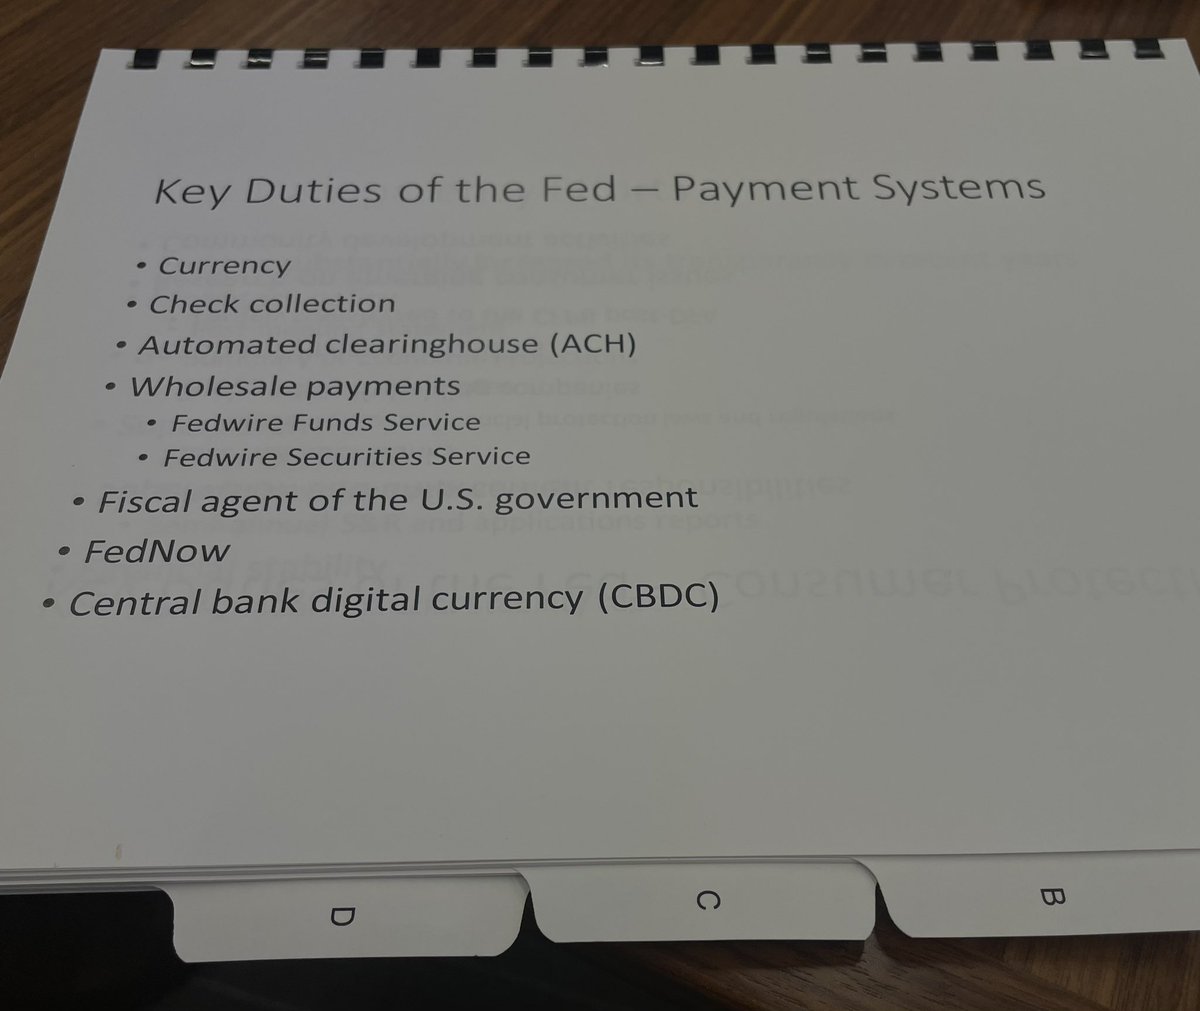 If you don’t think the Fed is pursuing a CBDC, think again. The Fed gave this to my staff during a presentation earlier this Congress. They view a CBDC as one of their KEY DUTIES.